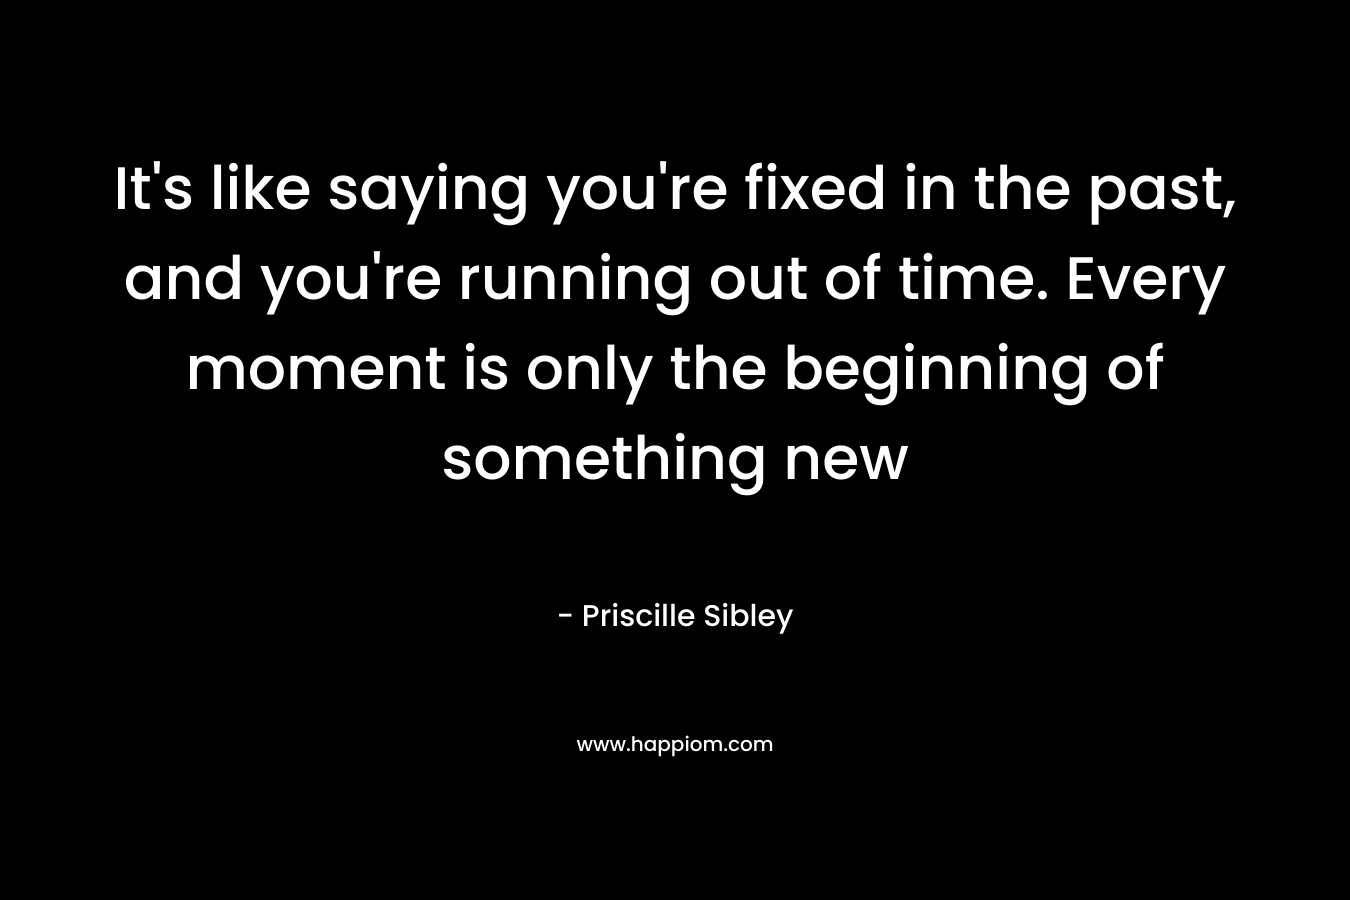 It's like saying you're fixed in the past, and you're running out of time. Every moment is only the beginning of something new